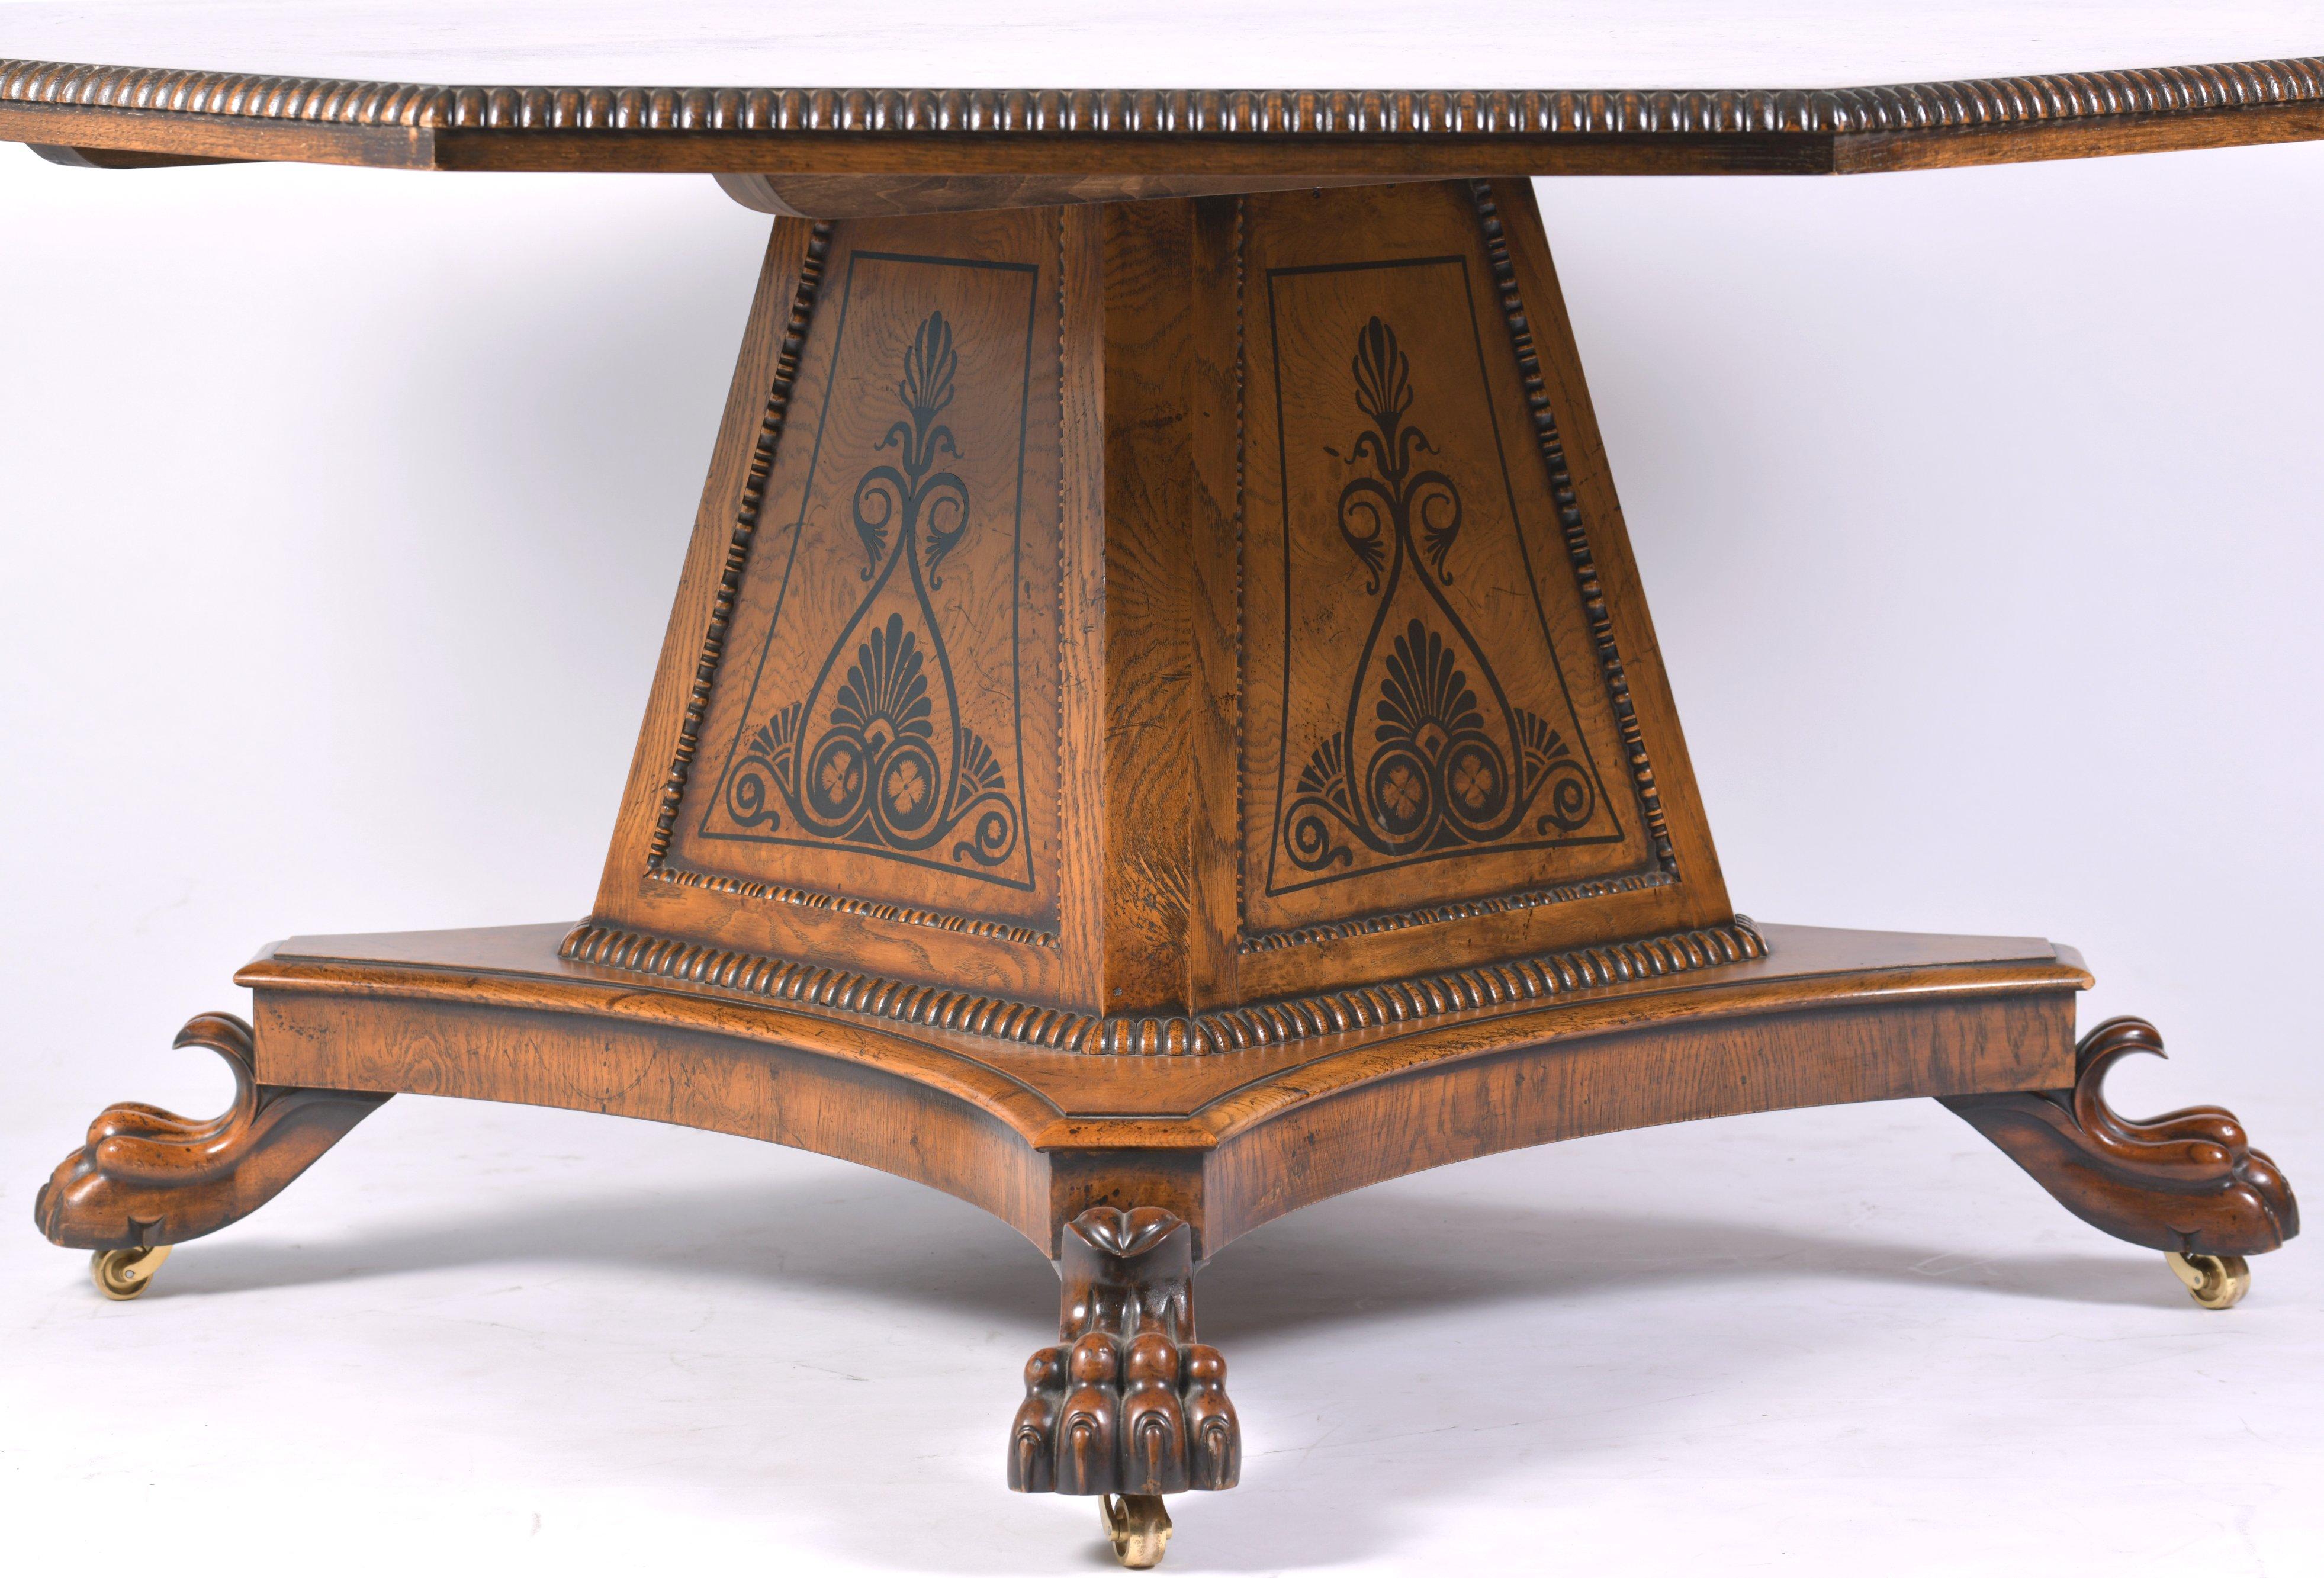 This beautiful and very stylish pollard oak octagonal dining table is in the manner of George Bullock with ebony inlay detailing. The table features a central 4 sided pedestal base with ornate paw feet on brass castors. It measures 63 in – 160 cm in